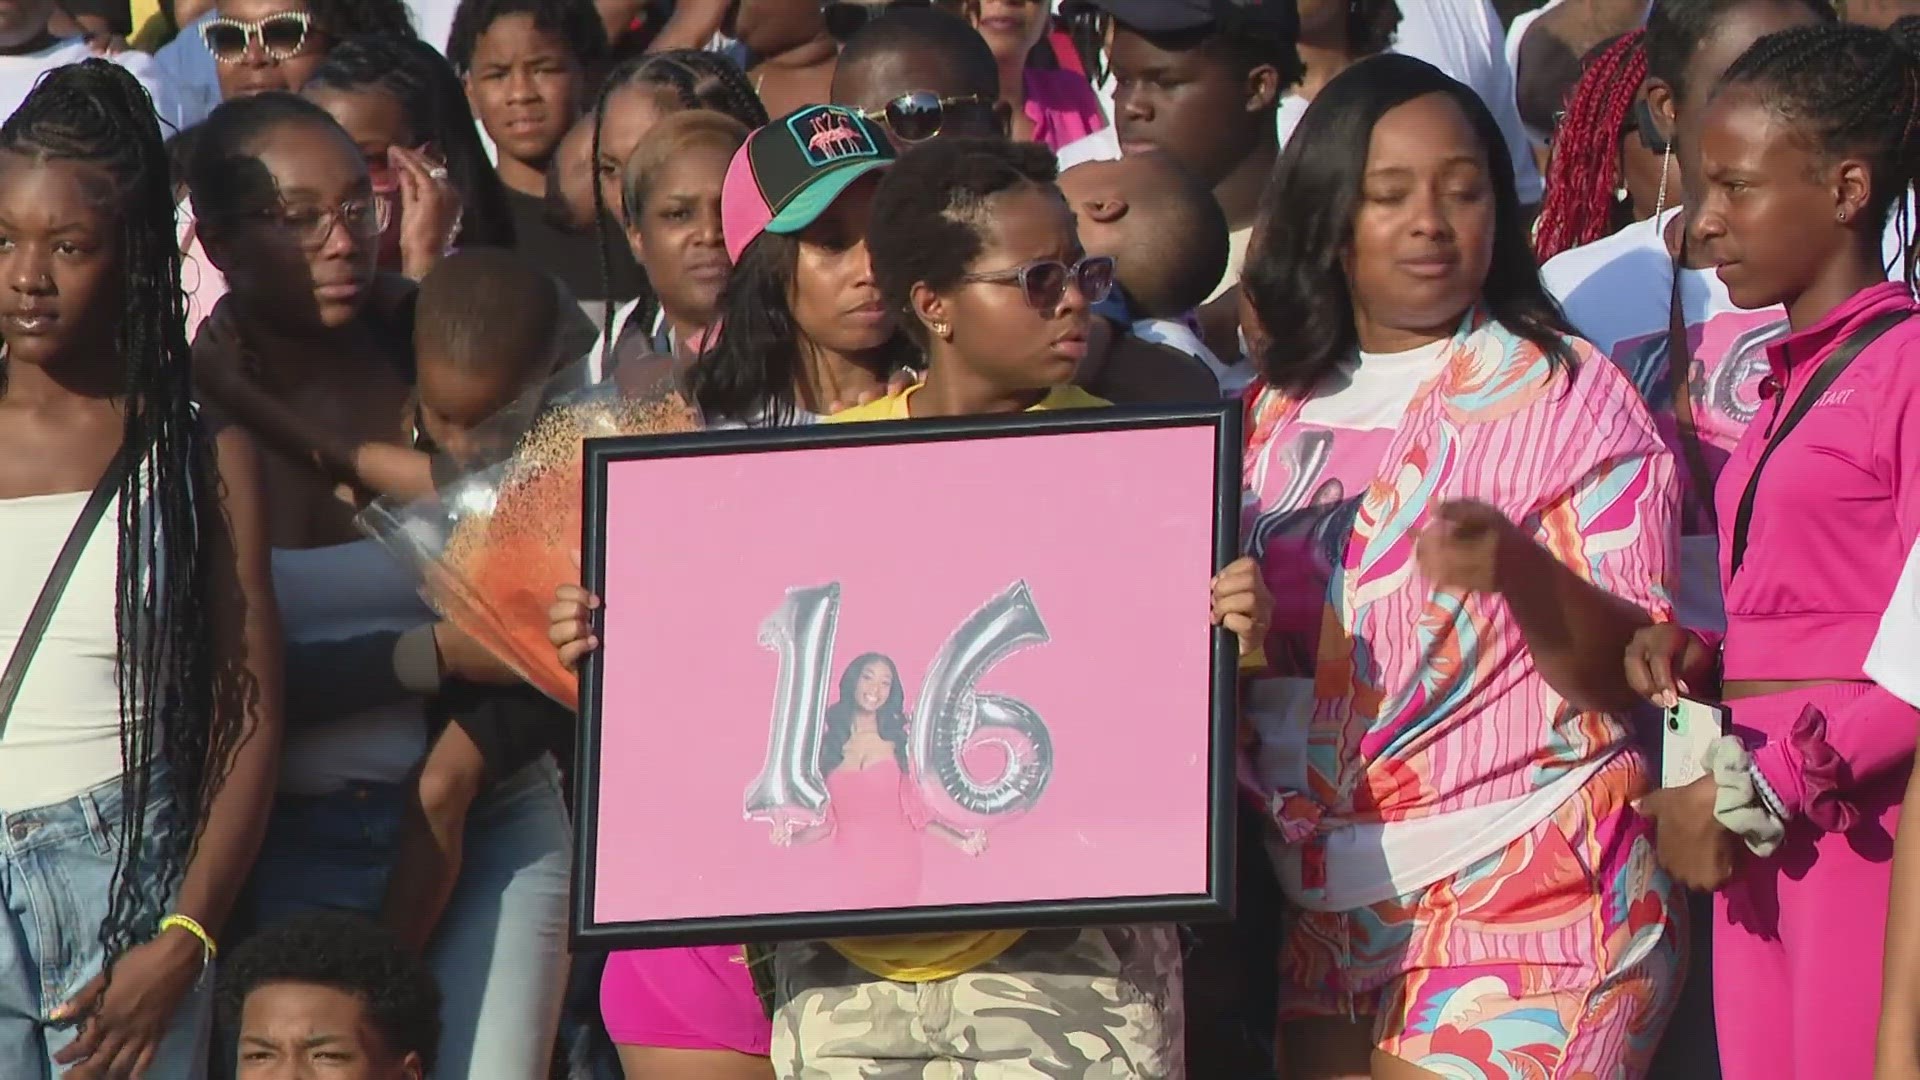 Friends and family gathered to honor 16-year-old Serenity Wilson Friday, who was shot and killed at a block party earlier this week.